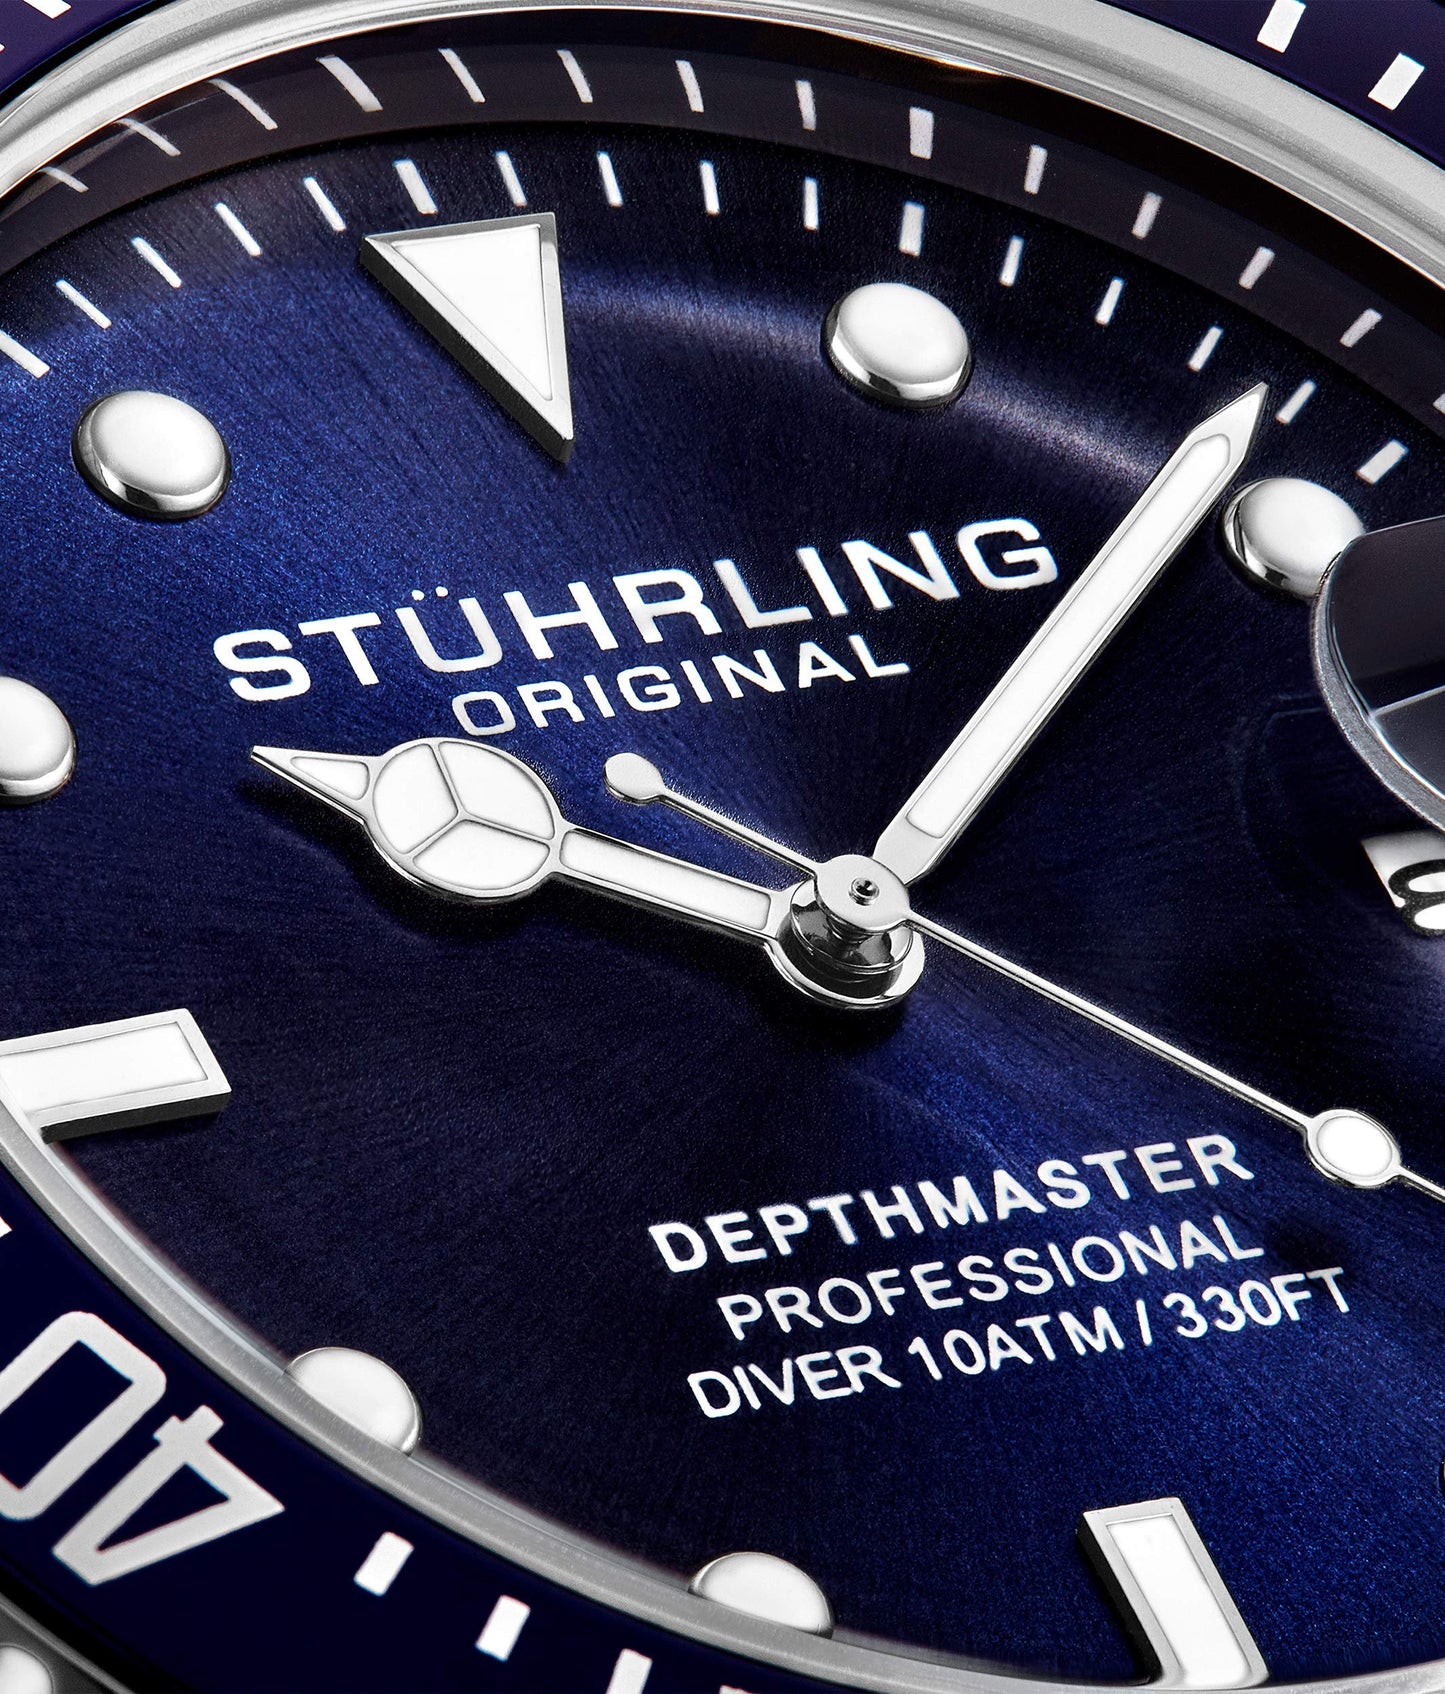 Stuhrling Original Watches for Men - Pro Diver Watch - Sports Watch for Men with Screw Down Crown for 330 Ft. of Water Resistance - Analog Dial, Quartz Movement - Mens Watches Collection (Blue)